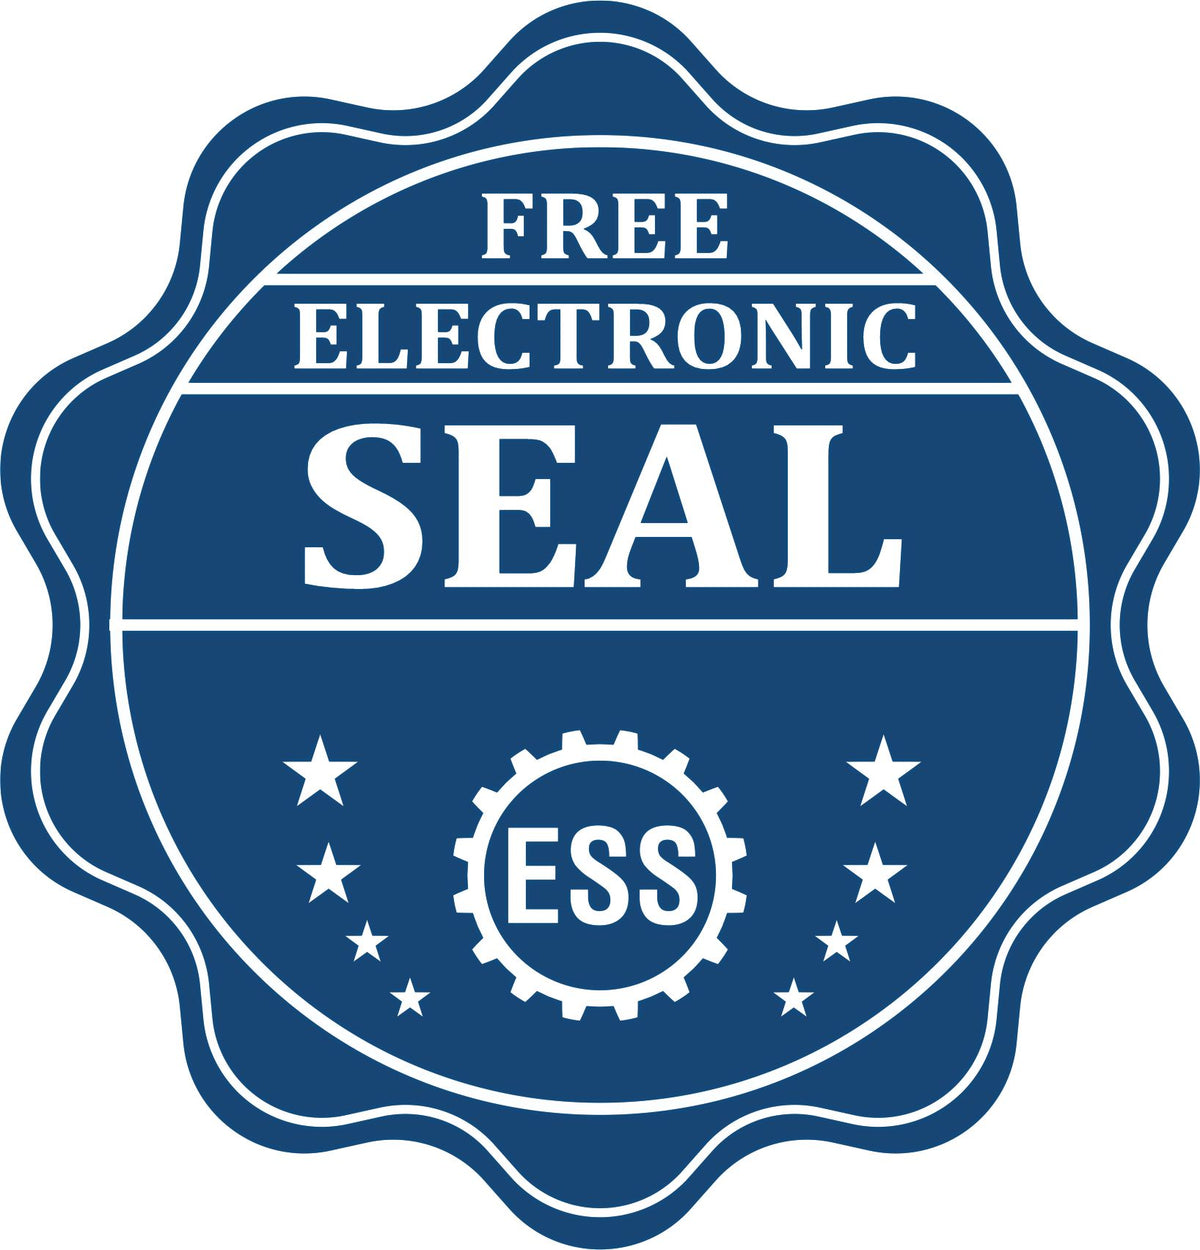 A badge showing a free electronic seal for the Gift Michigan Architect Seal with stars and the ESS gear on the emblem.